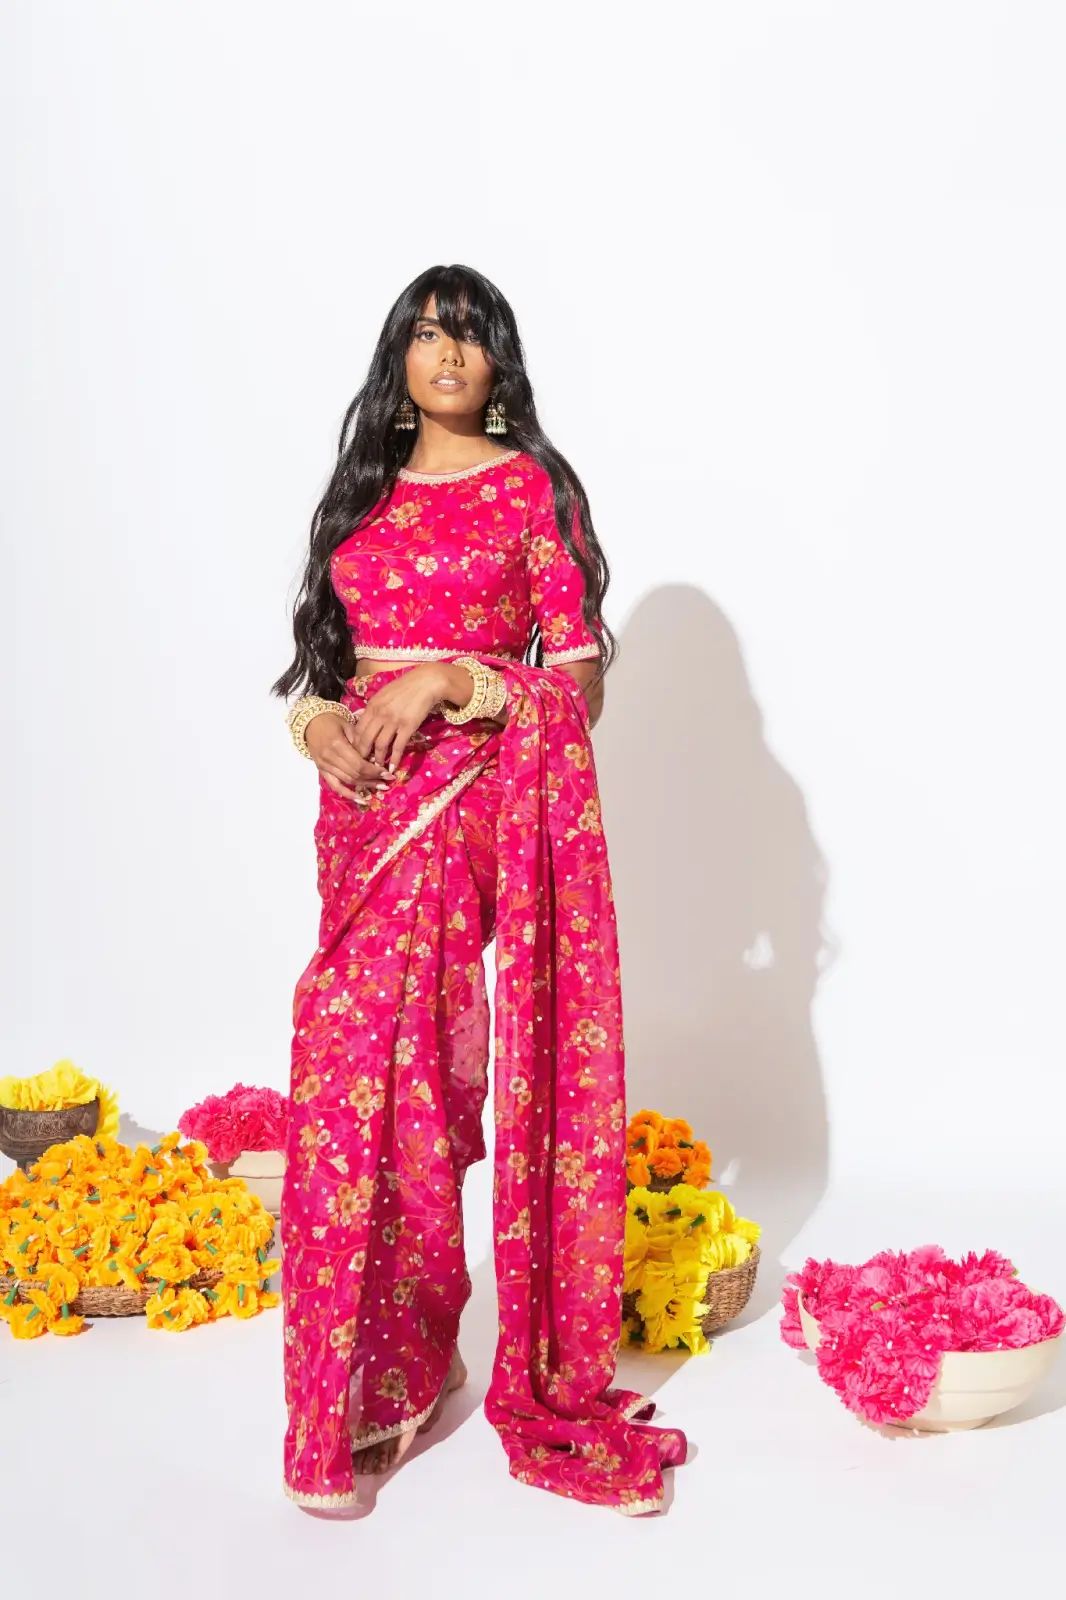 Here's Why We're Obsessed With Mani Jassal's Latest Collection "91": Floral beauty. Photo Credit: Mani Jassal